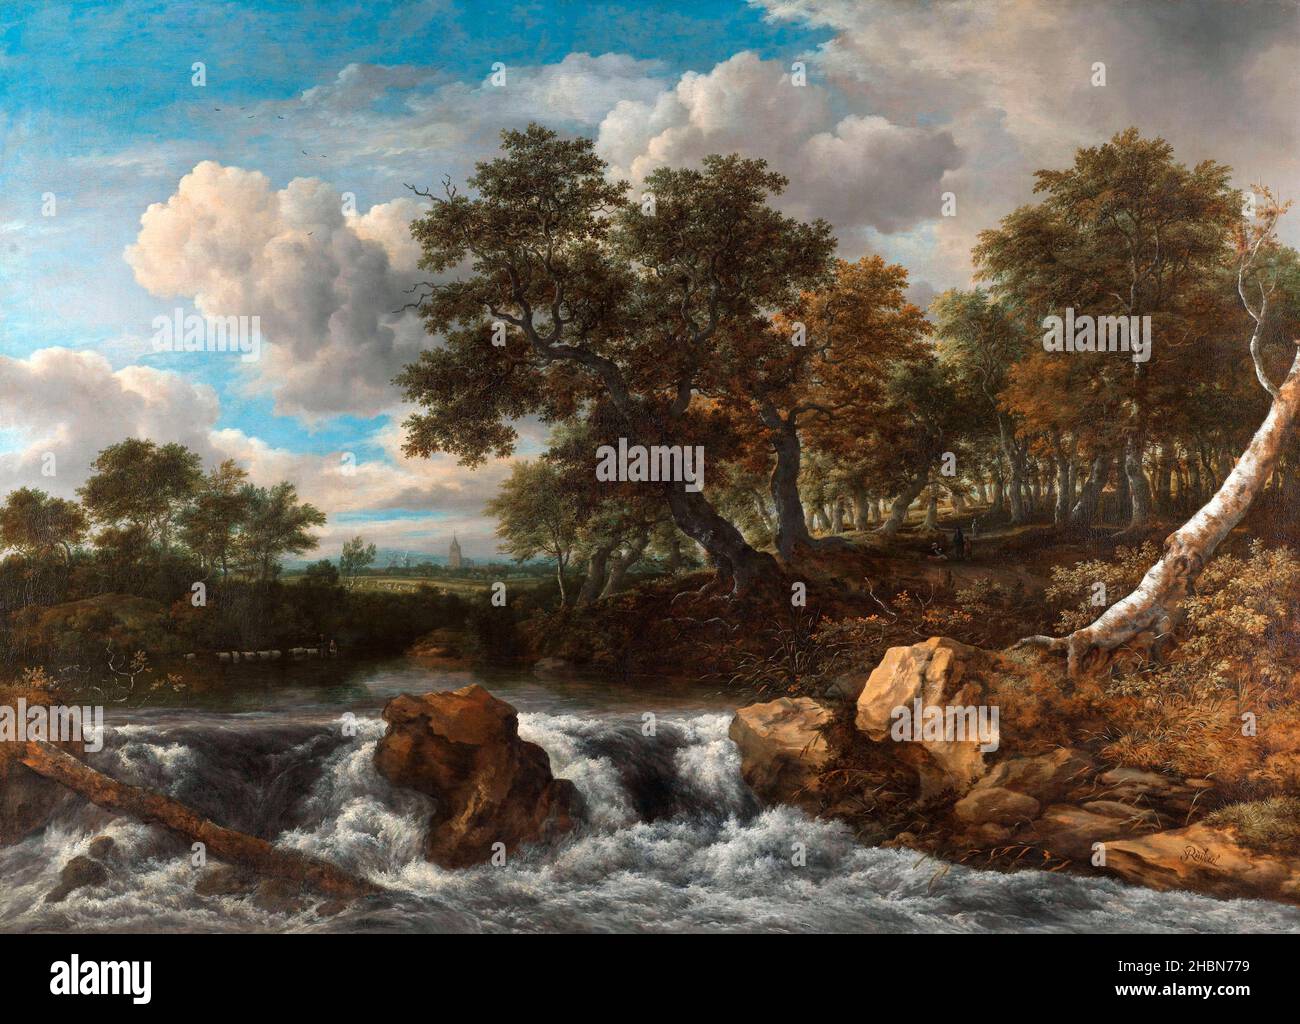 Jacob van Ruisdael. Painting entitled 'Landscape with Waterfall' by the Dutch Golden Age painter, Jacob Isaackszoon van Ruisdael (c. 1629- 1682), oil on canvas, c. 1668 Stock Photo